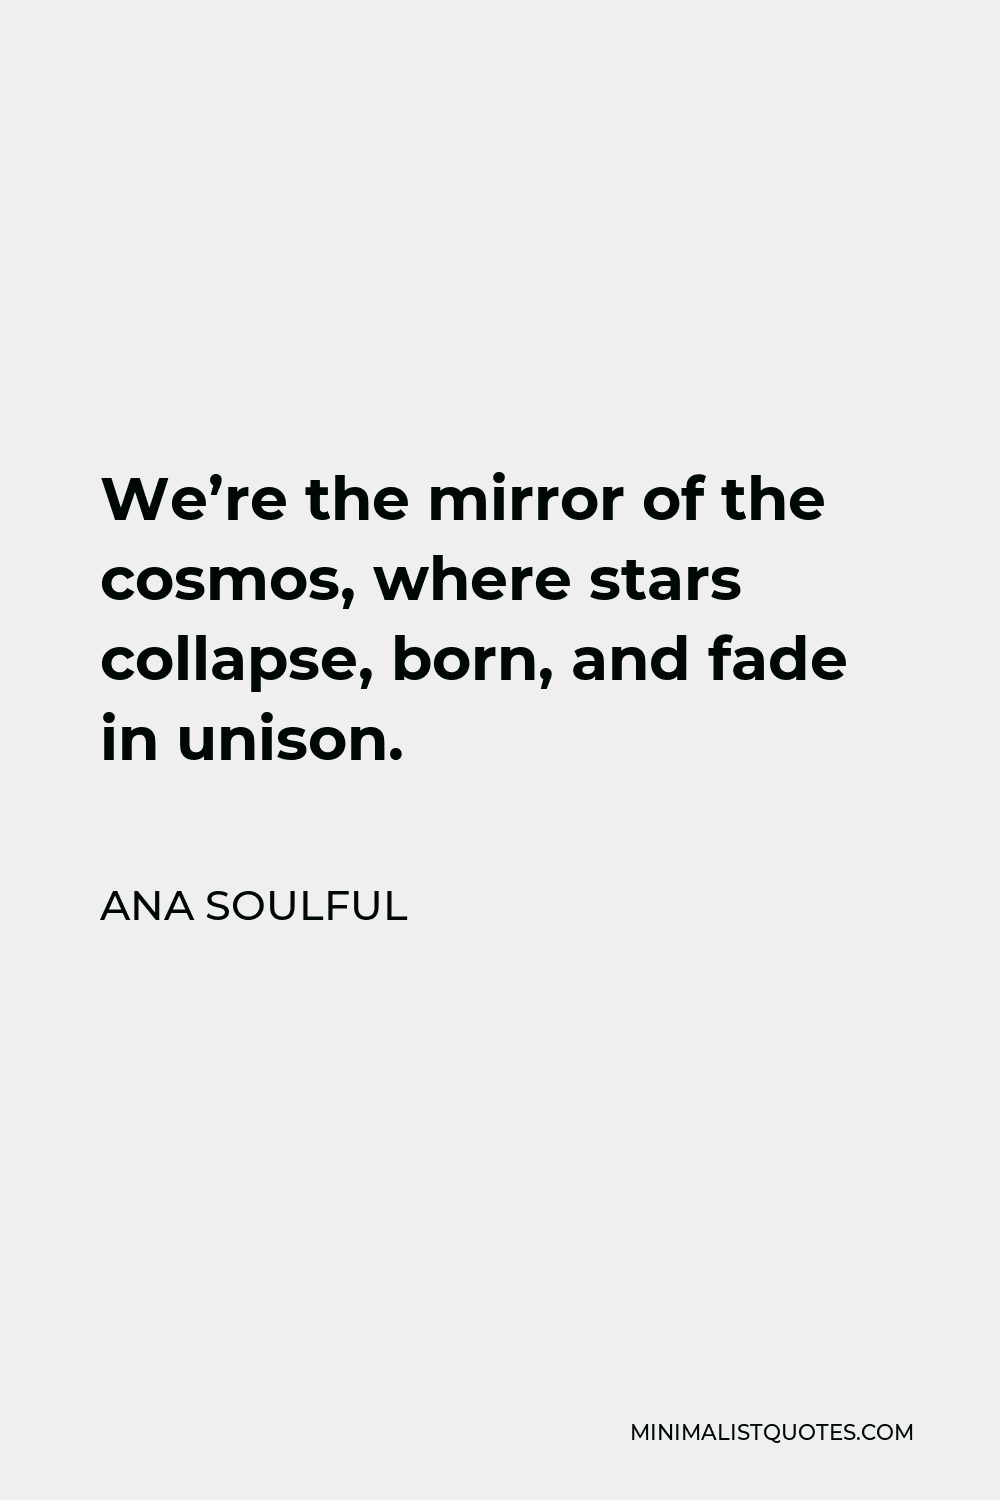 Ana Soulful Quote - We’re the mirror of the cosmos, where stars collapse, born, and fade in unison.